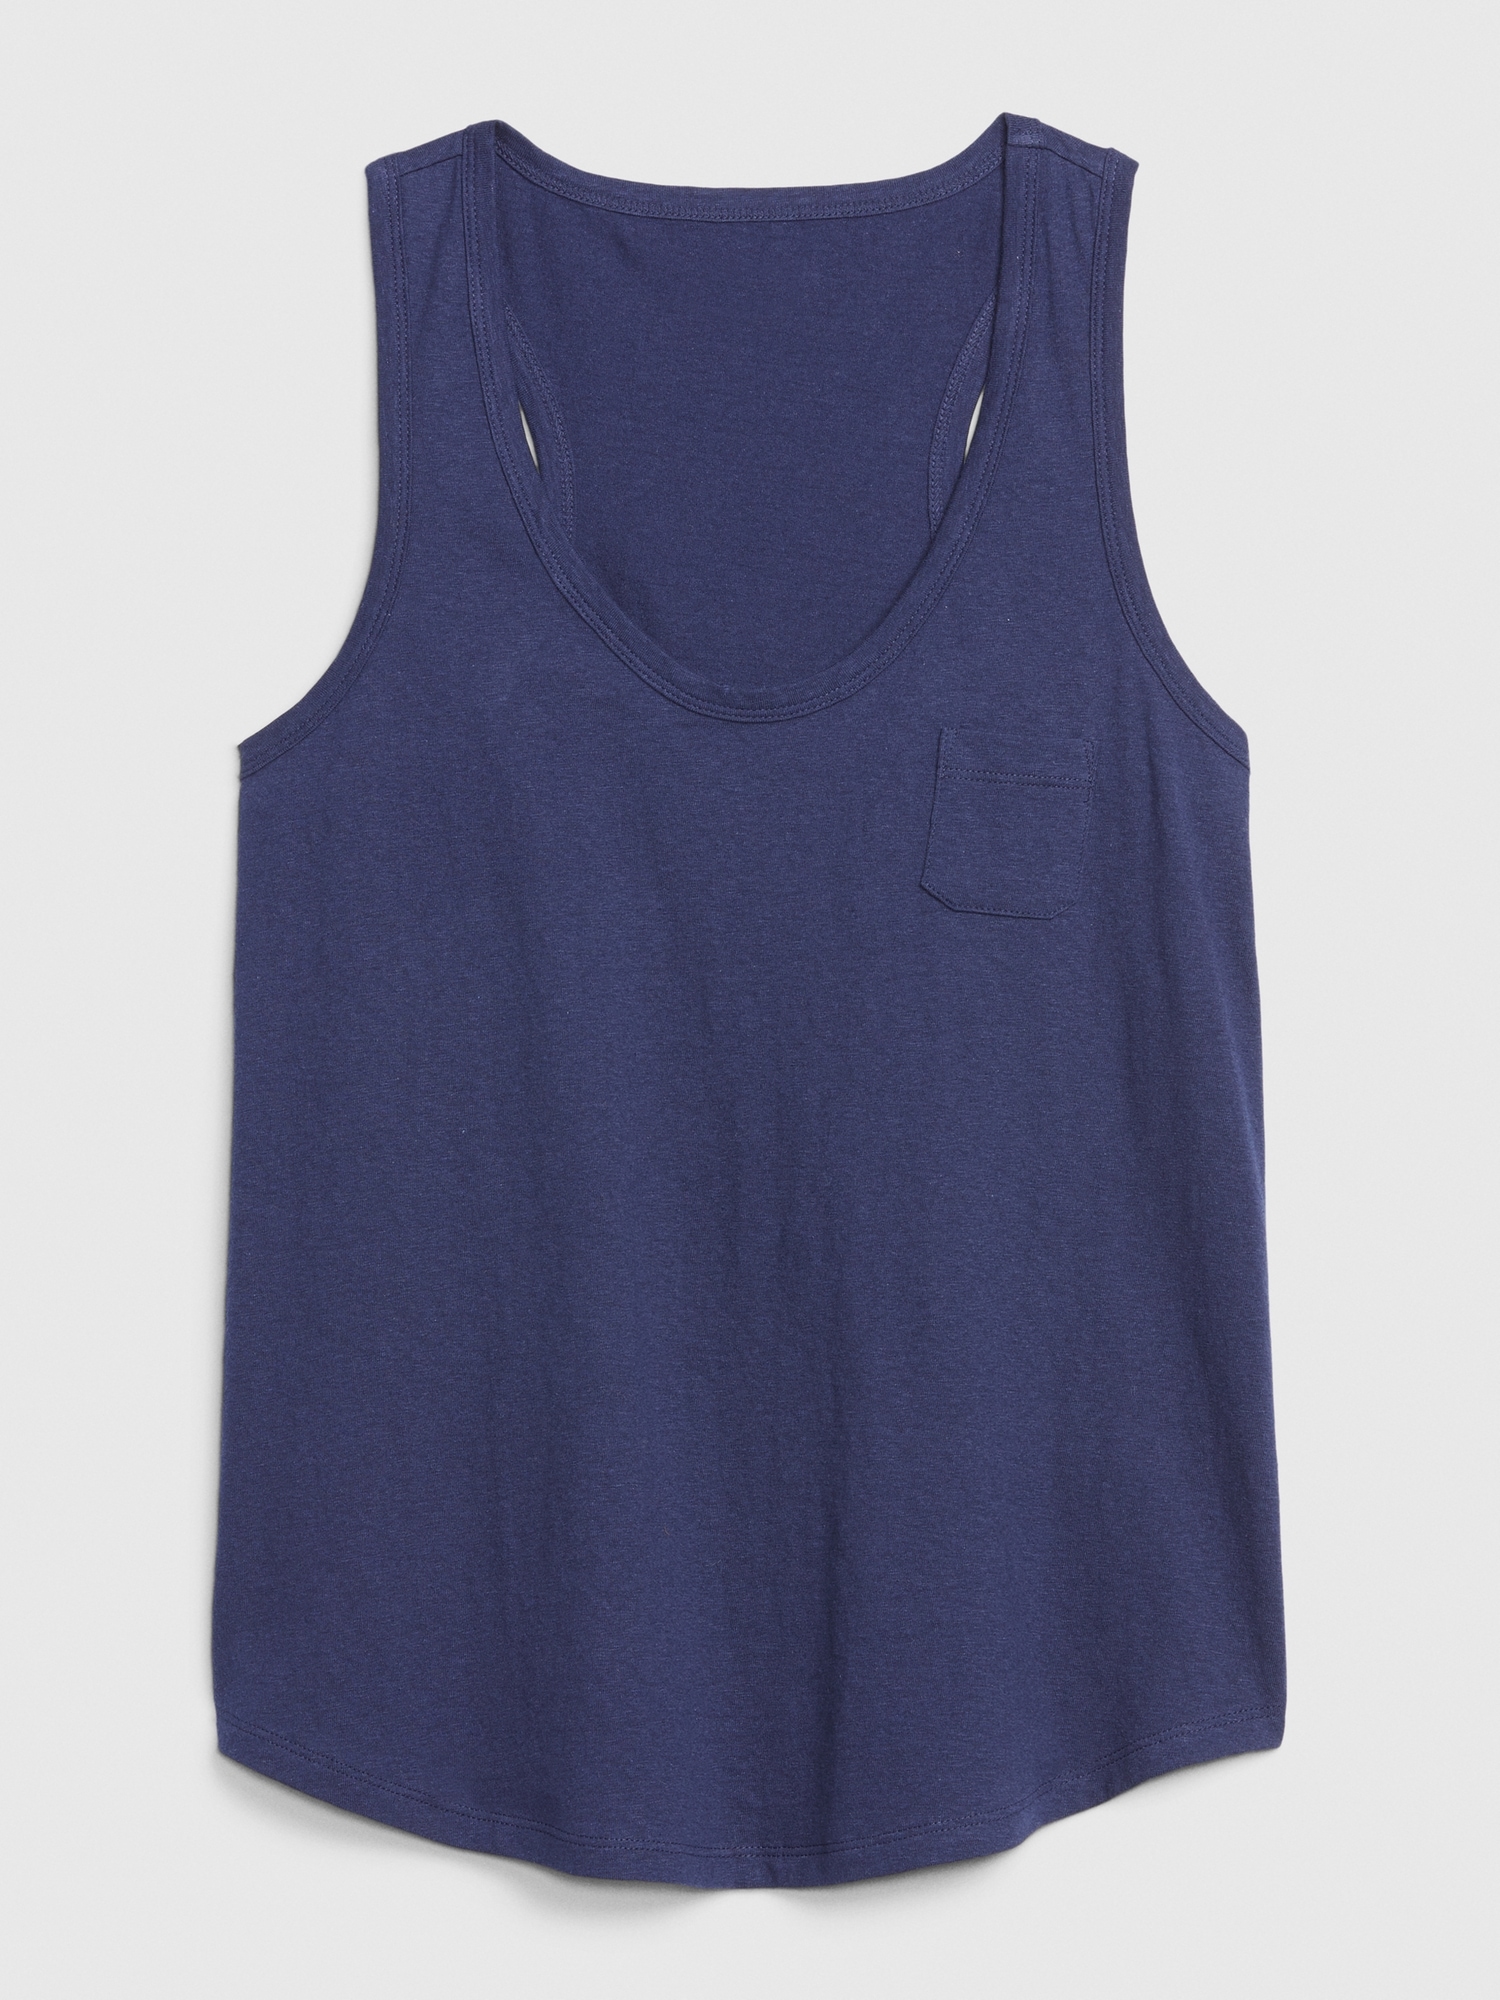 Captiva Women's Loose Fitted Tank